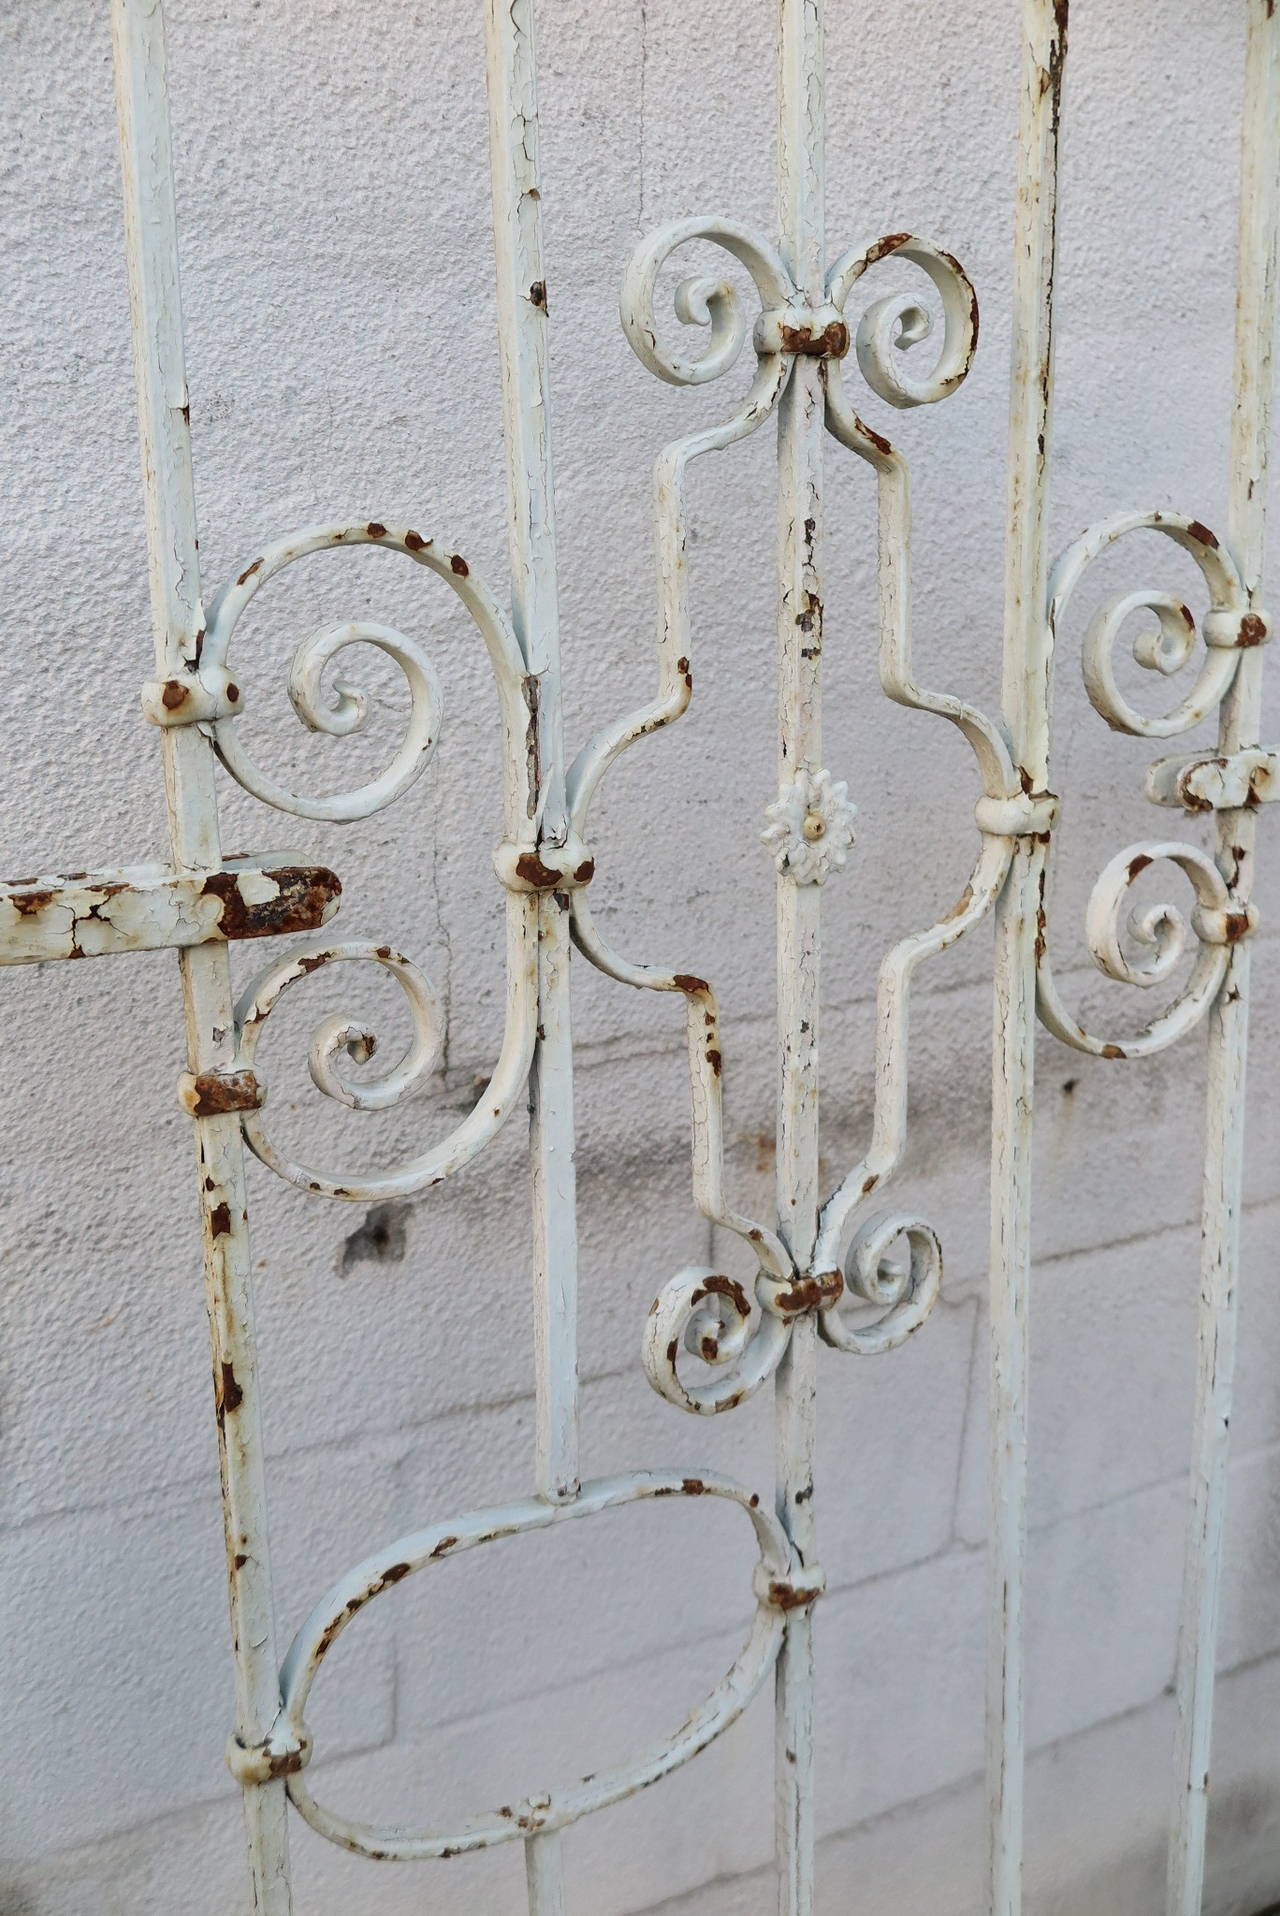 A pair of French wrought iron gates with old white paint.